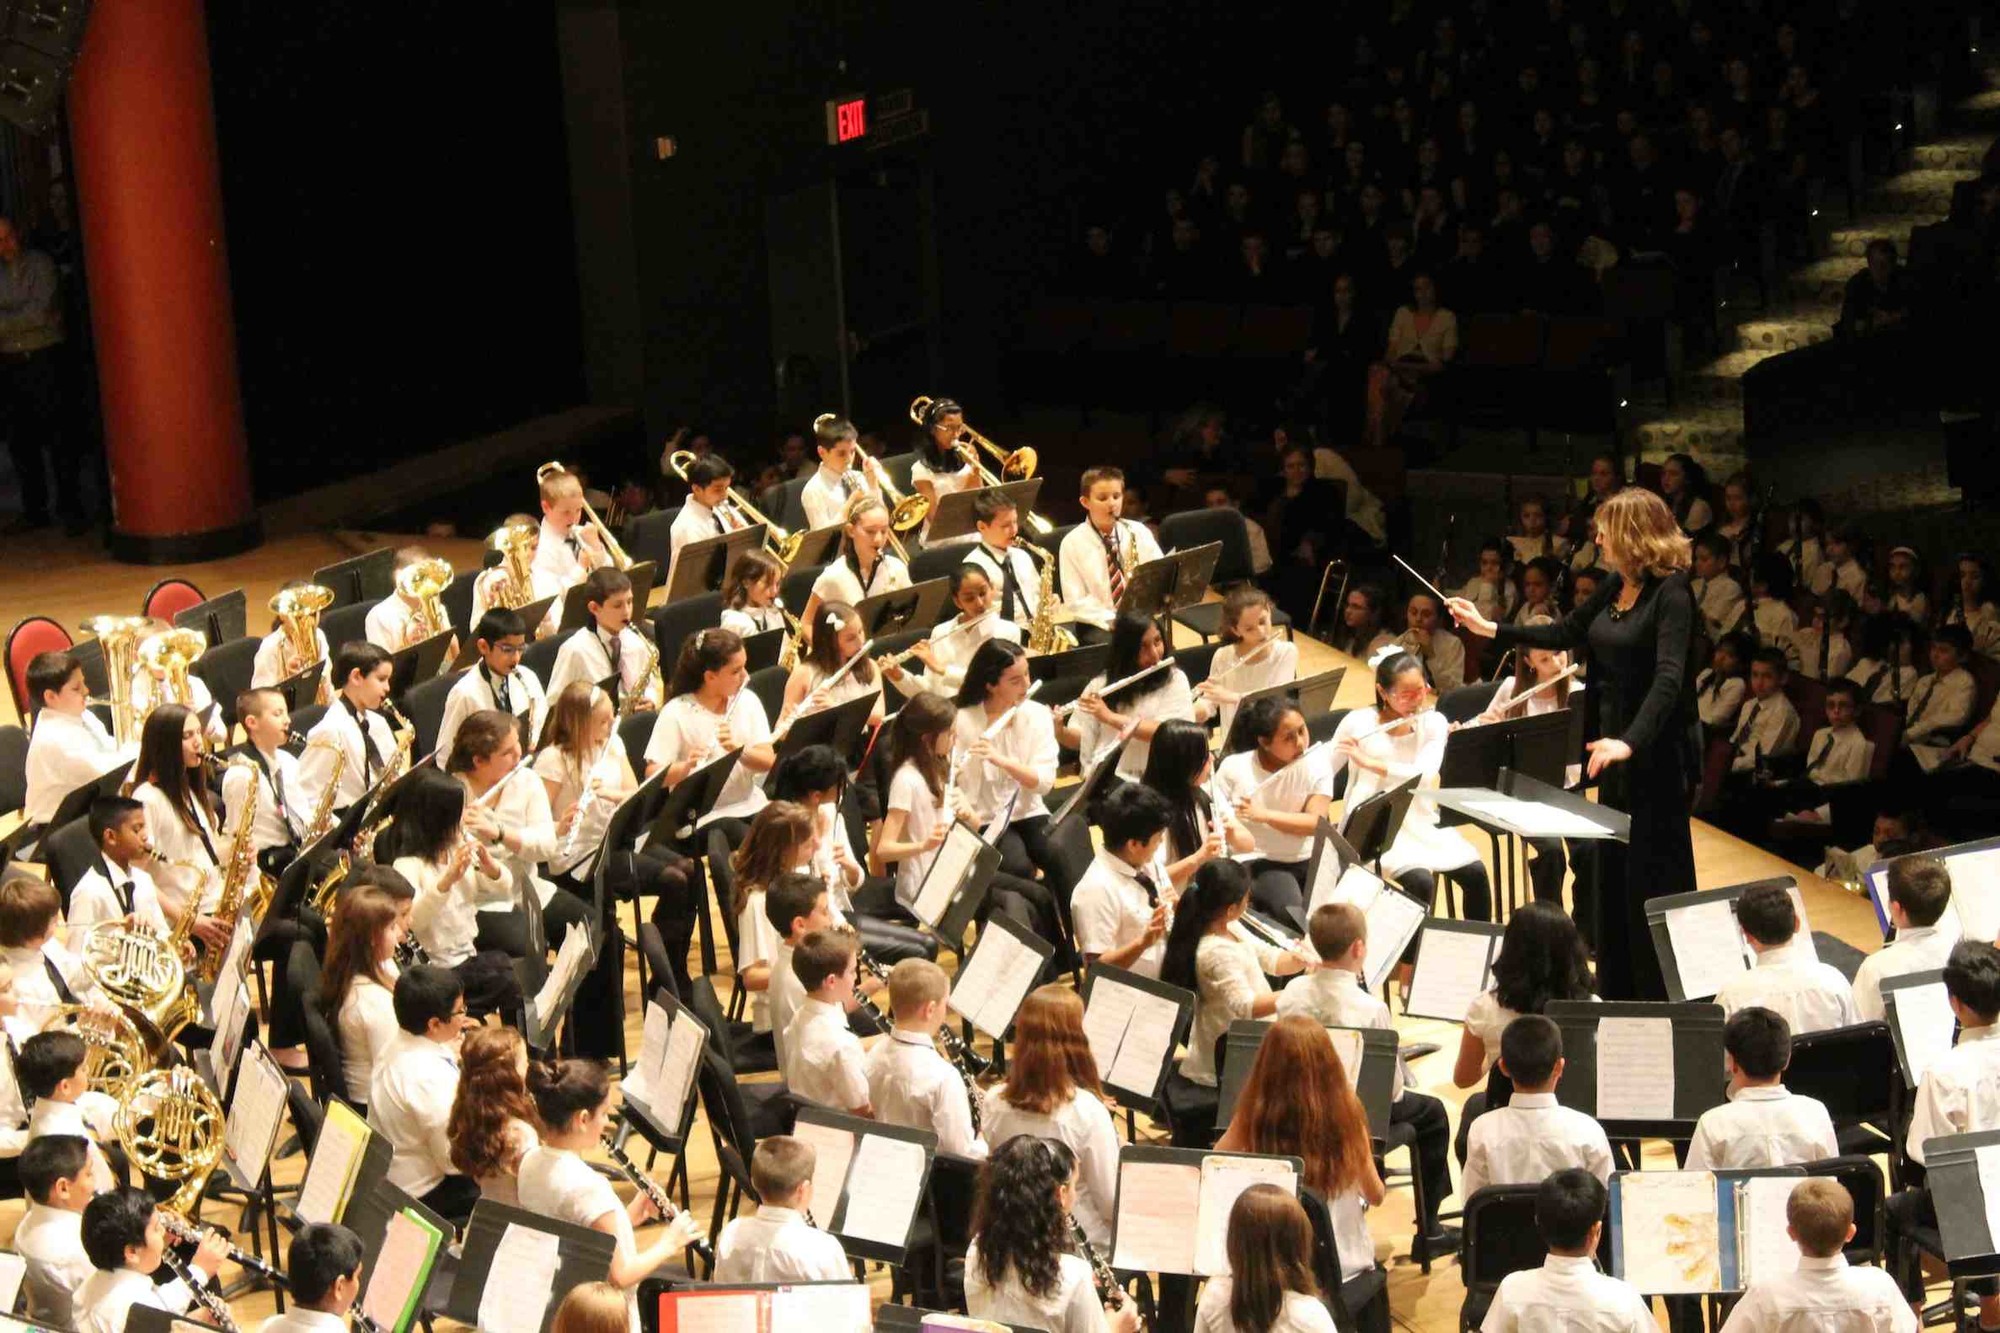 The All-District Elementary Band, students from Barnum Woods and McVey elementary schools, opened the performance at the Tilles Center for the Performing Arts in Greenvale.